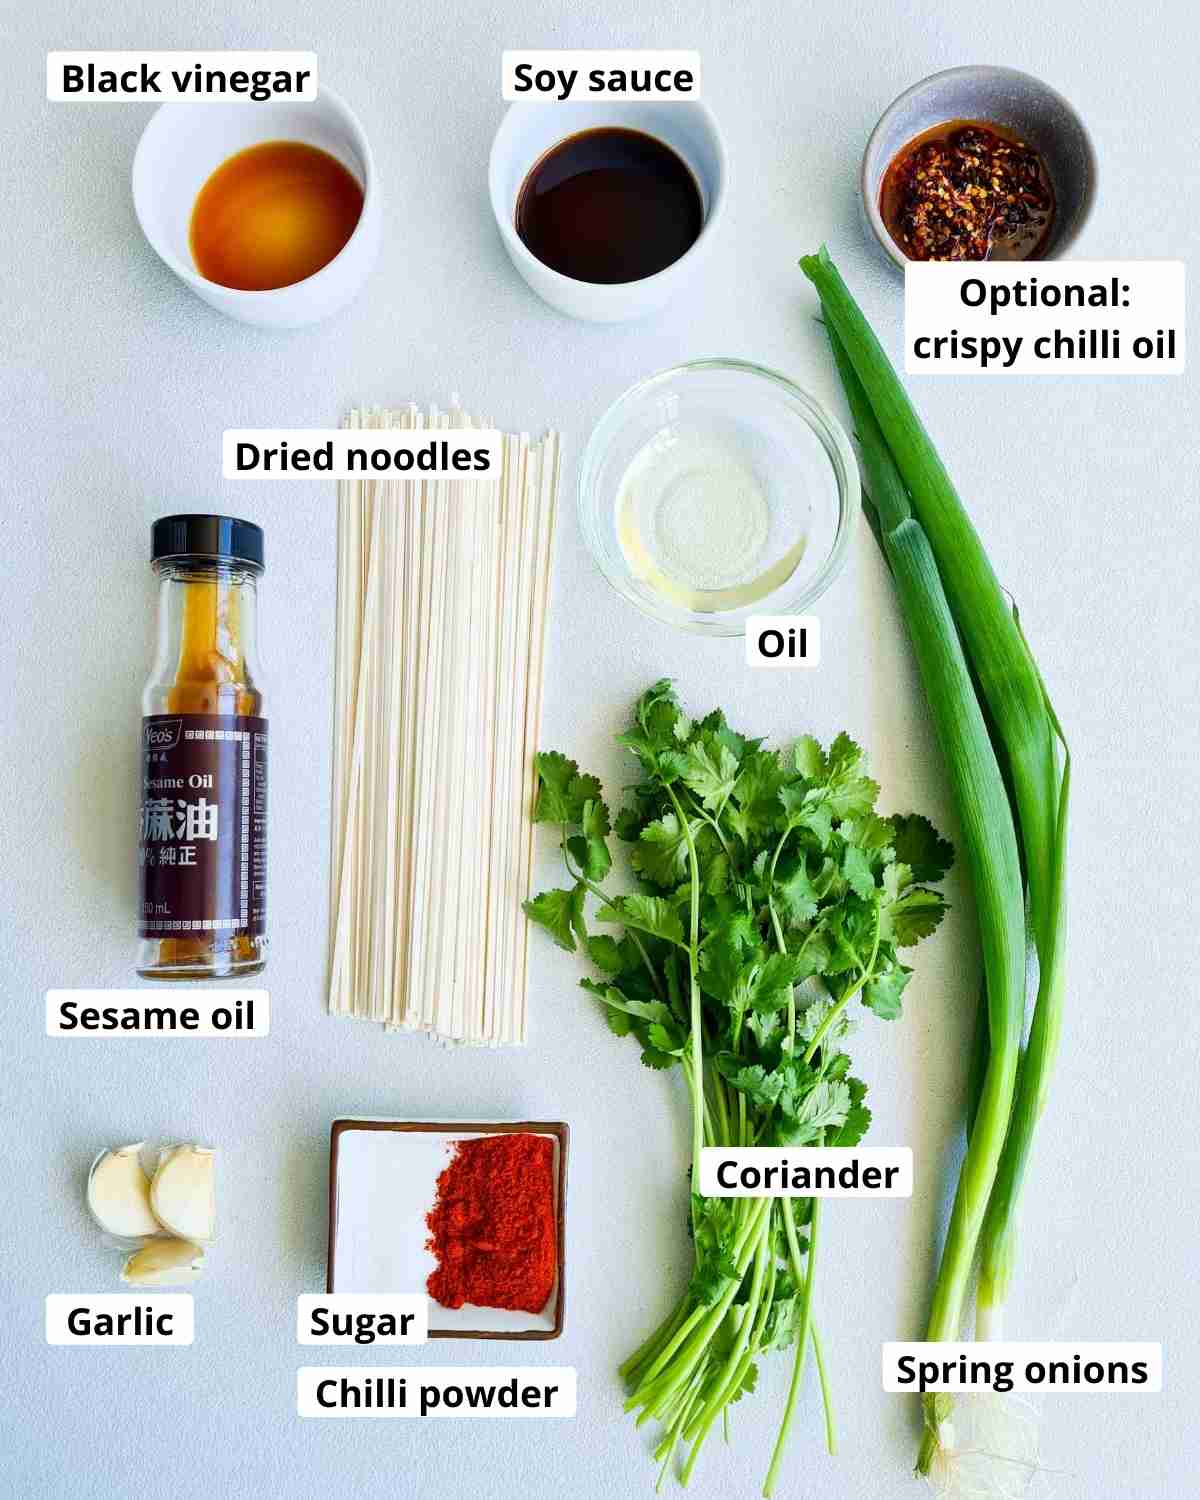 Ingredients required to make this recipe, labeled